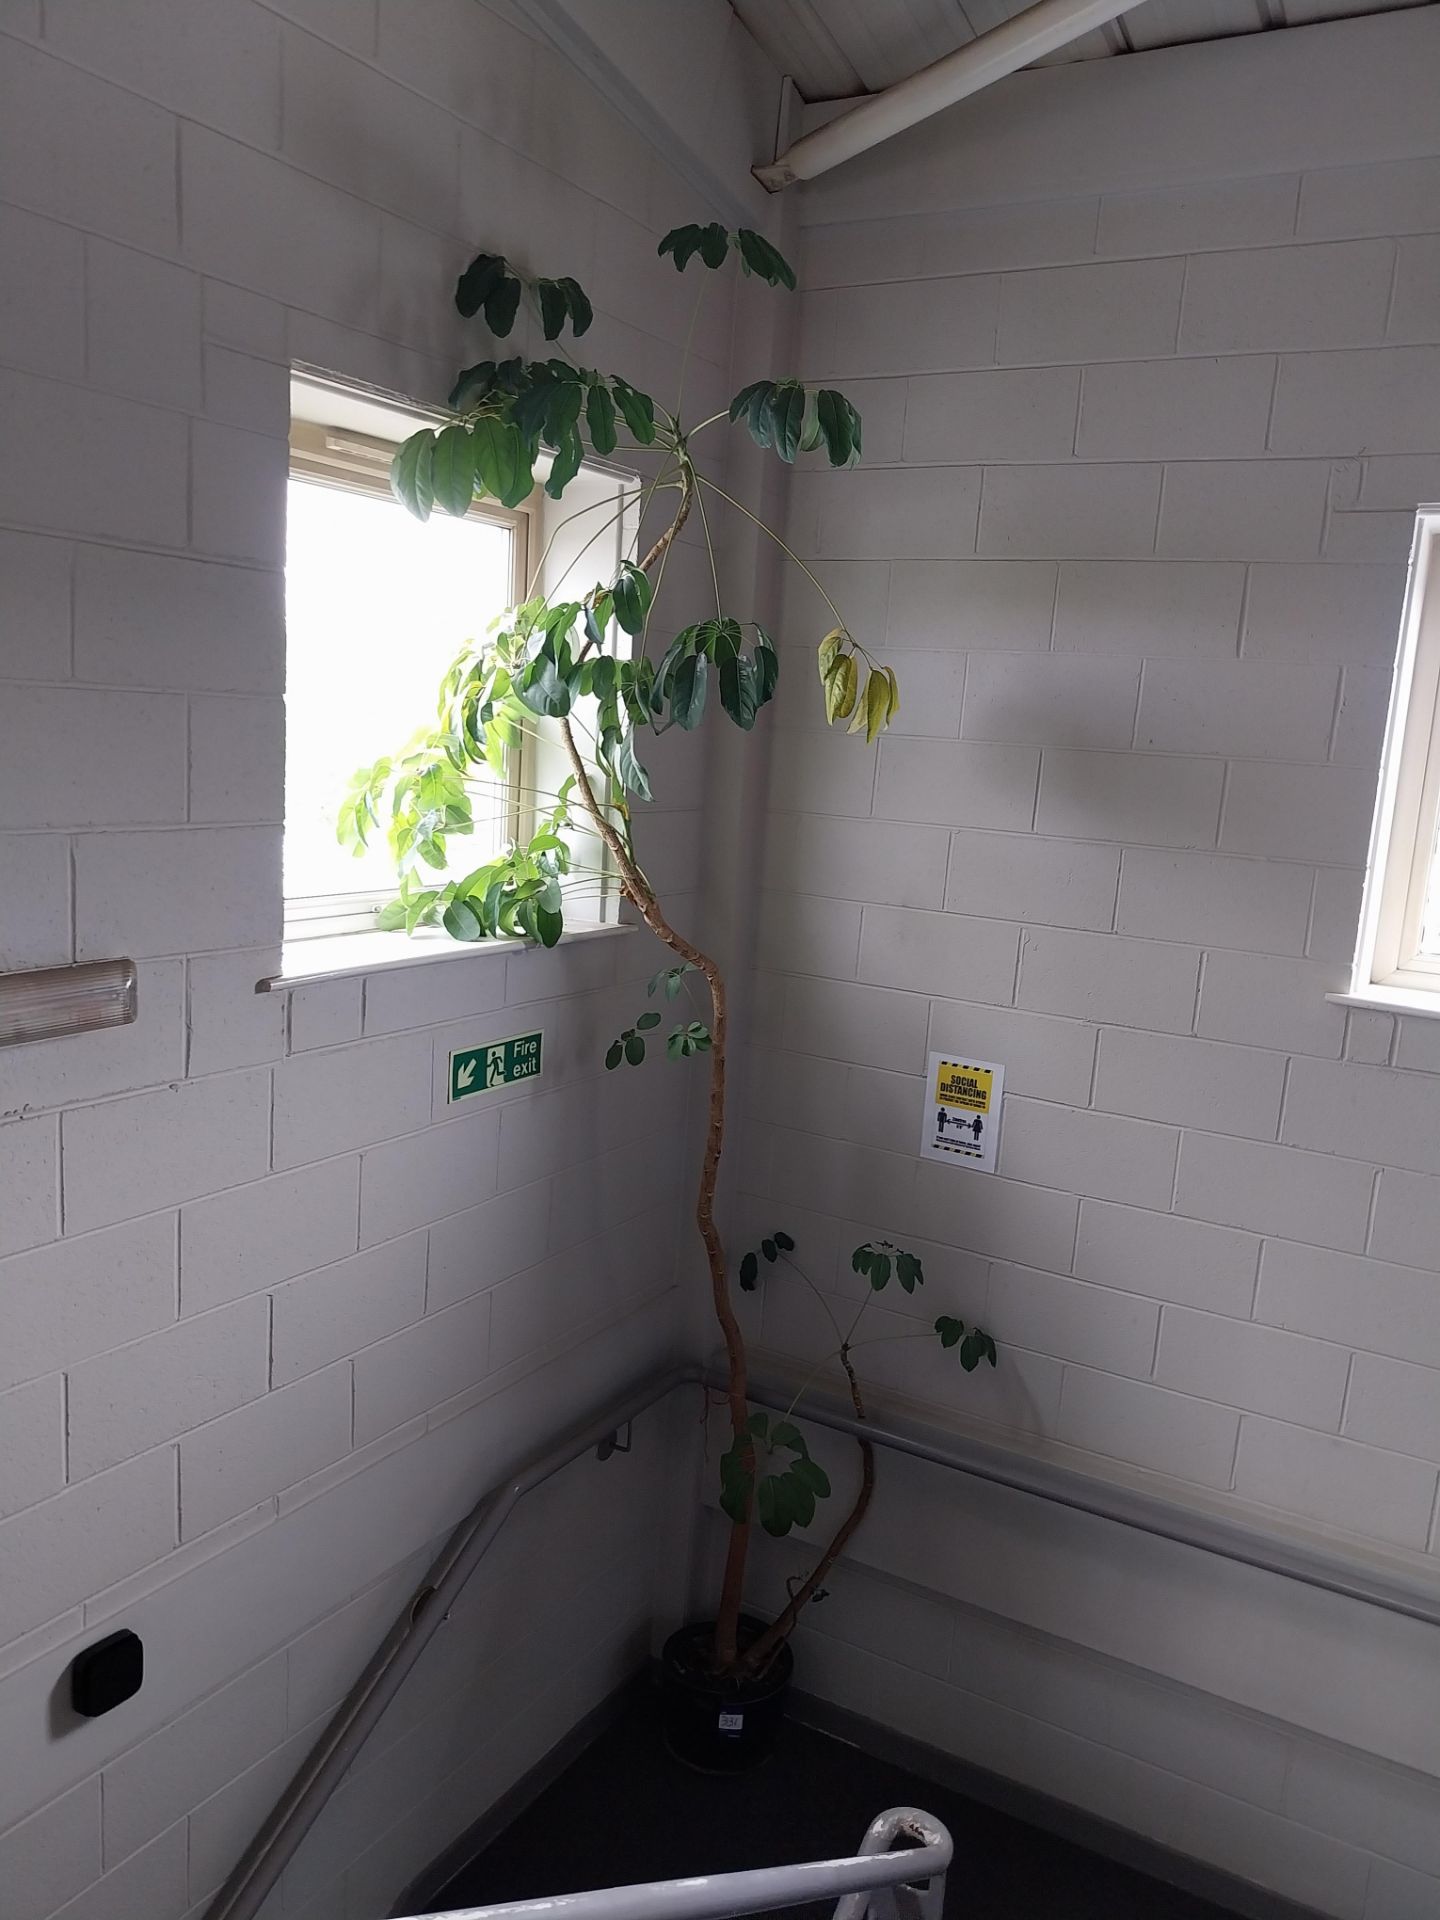 Large plant approx. 4m tall